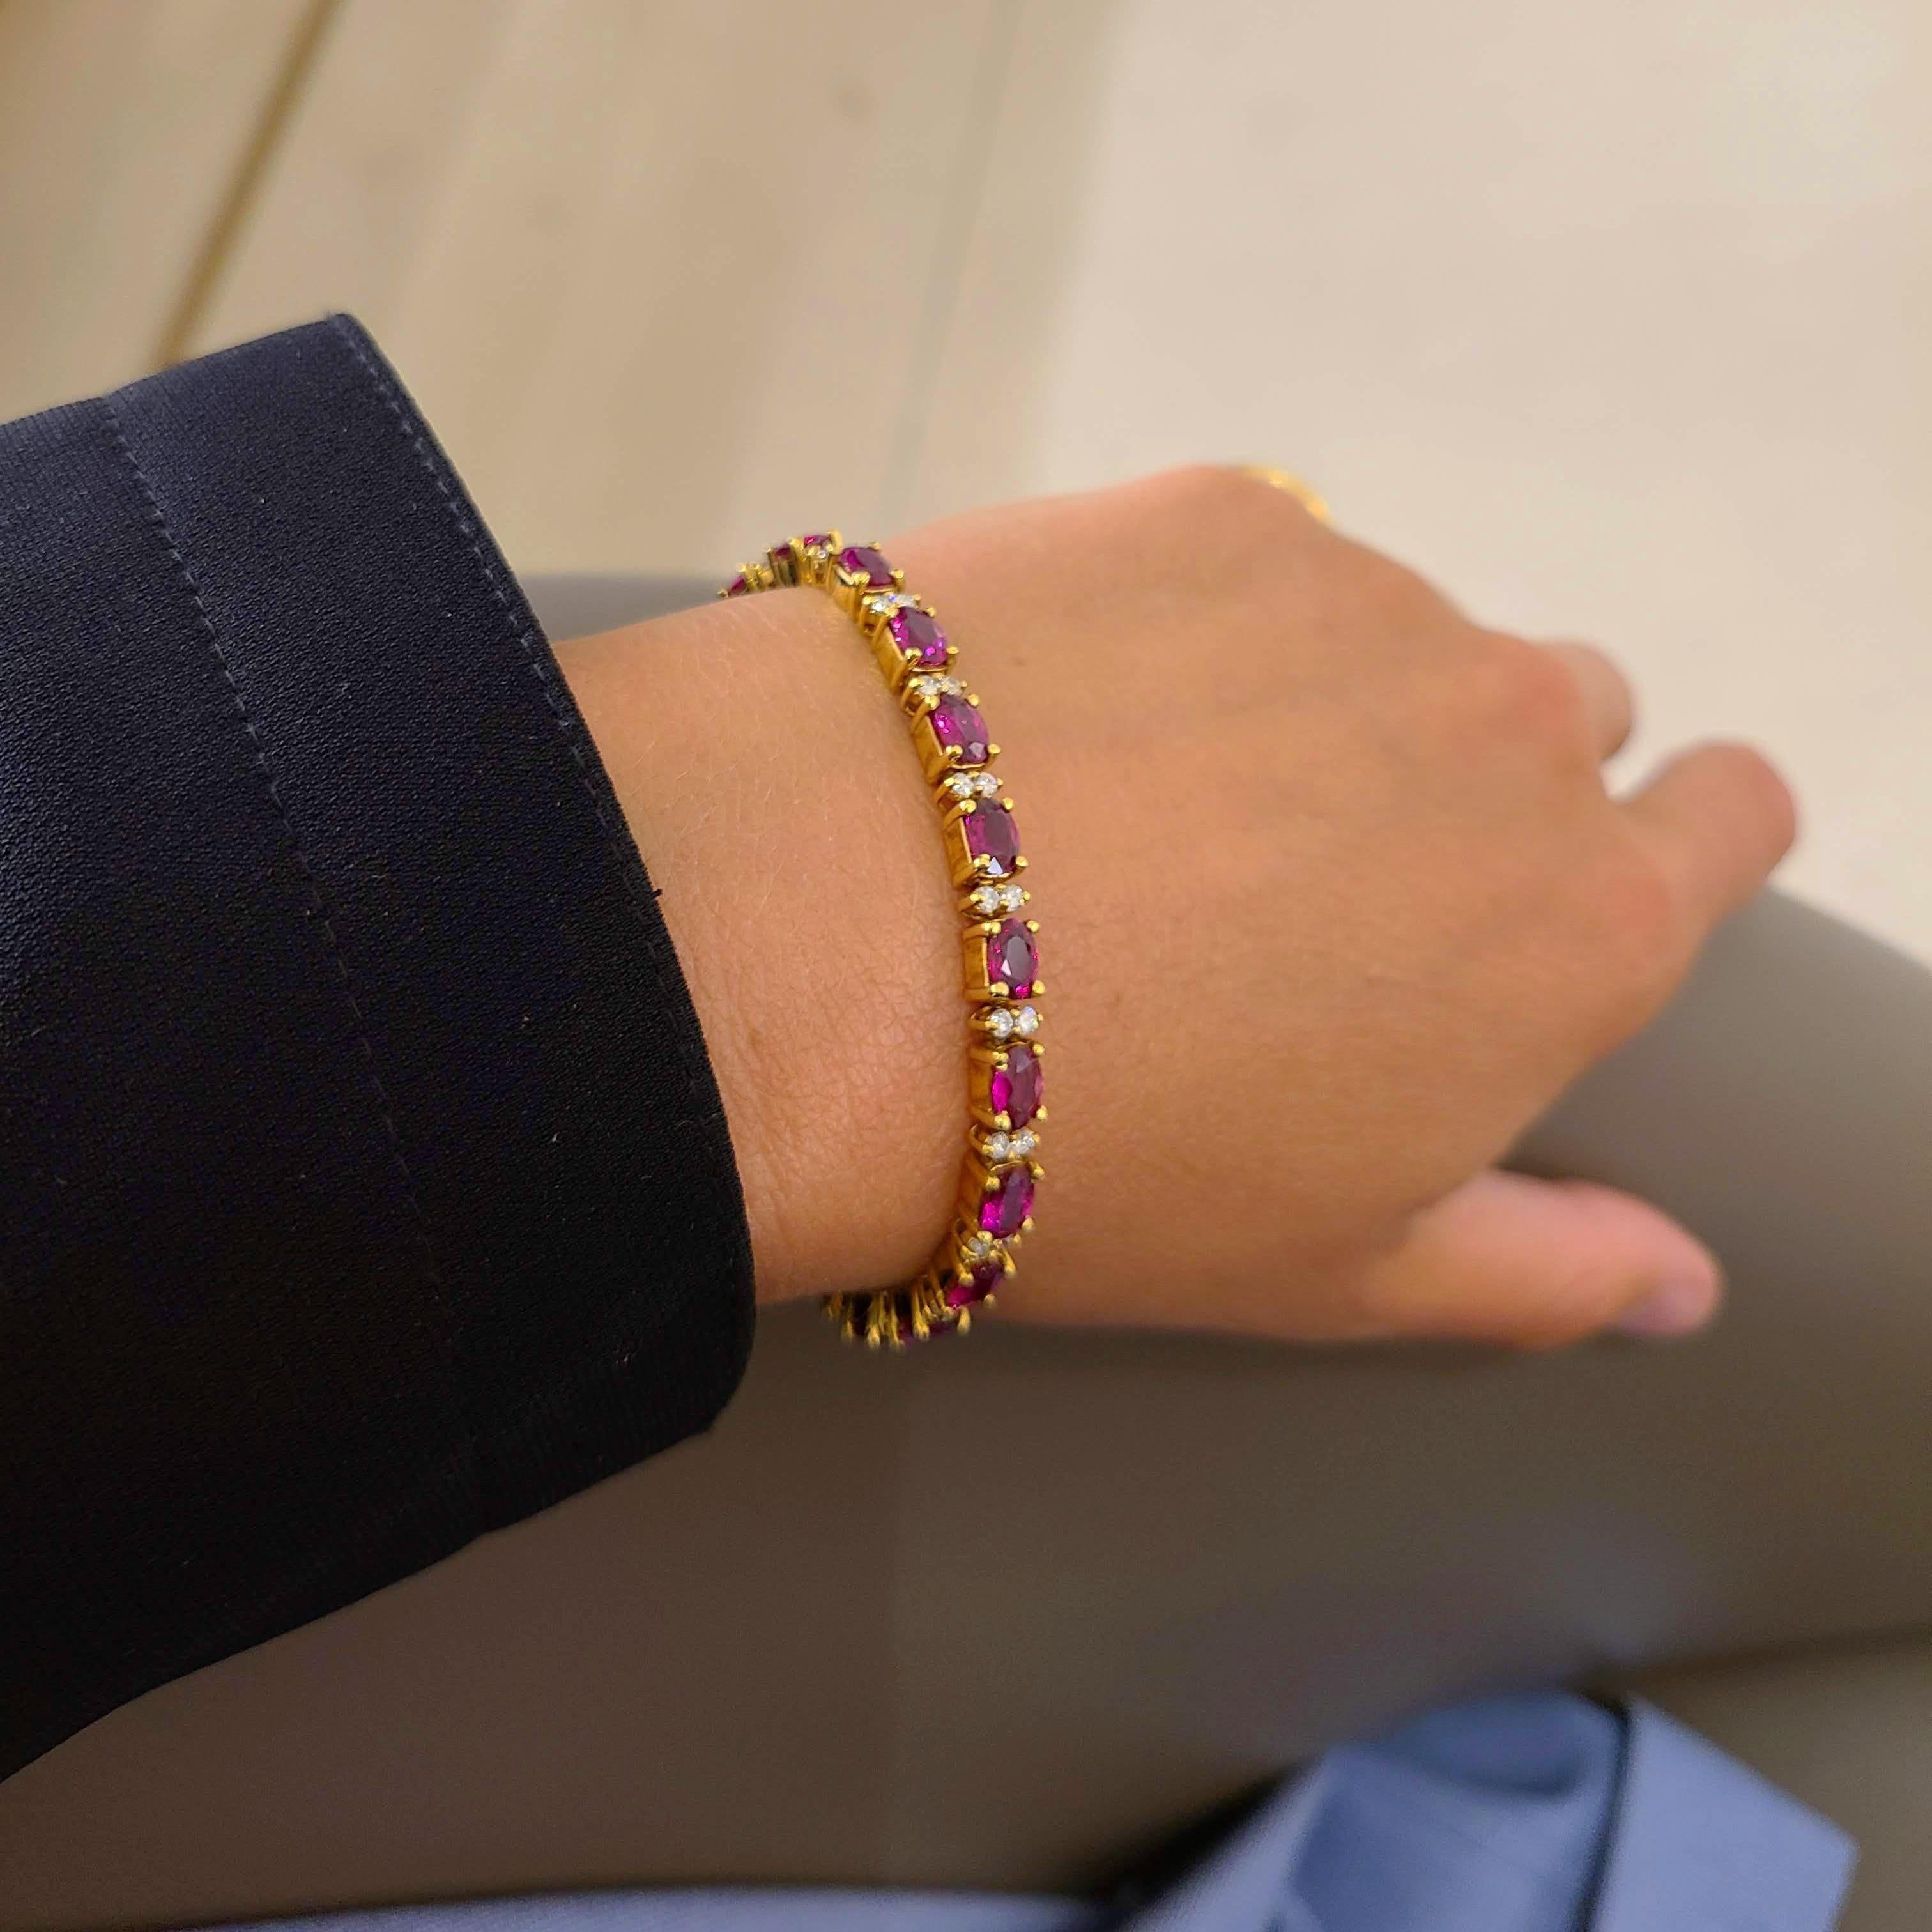 This 18 karat yellow gold bracelet is designed with 21 oval Rubies. Each ruby is set in a 4 prong setting. The Rubies alternate with 2 round brilliant Diamonds also set in 4 prongs. The bracelet measures 7